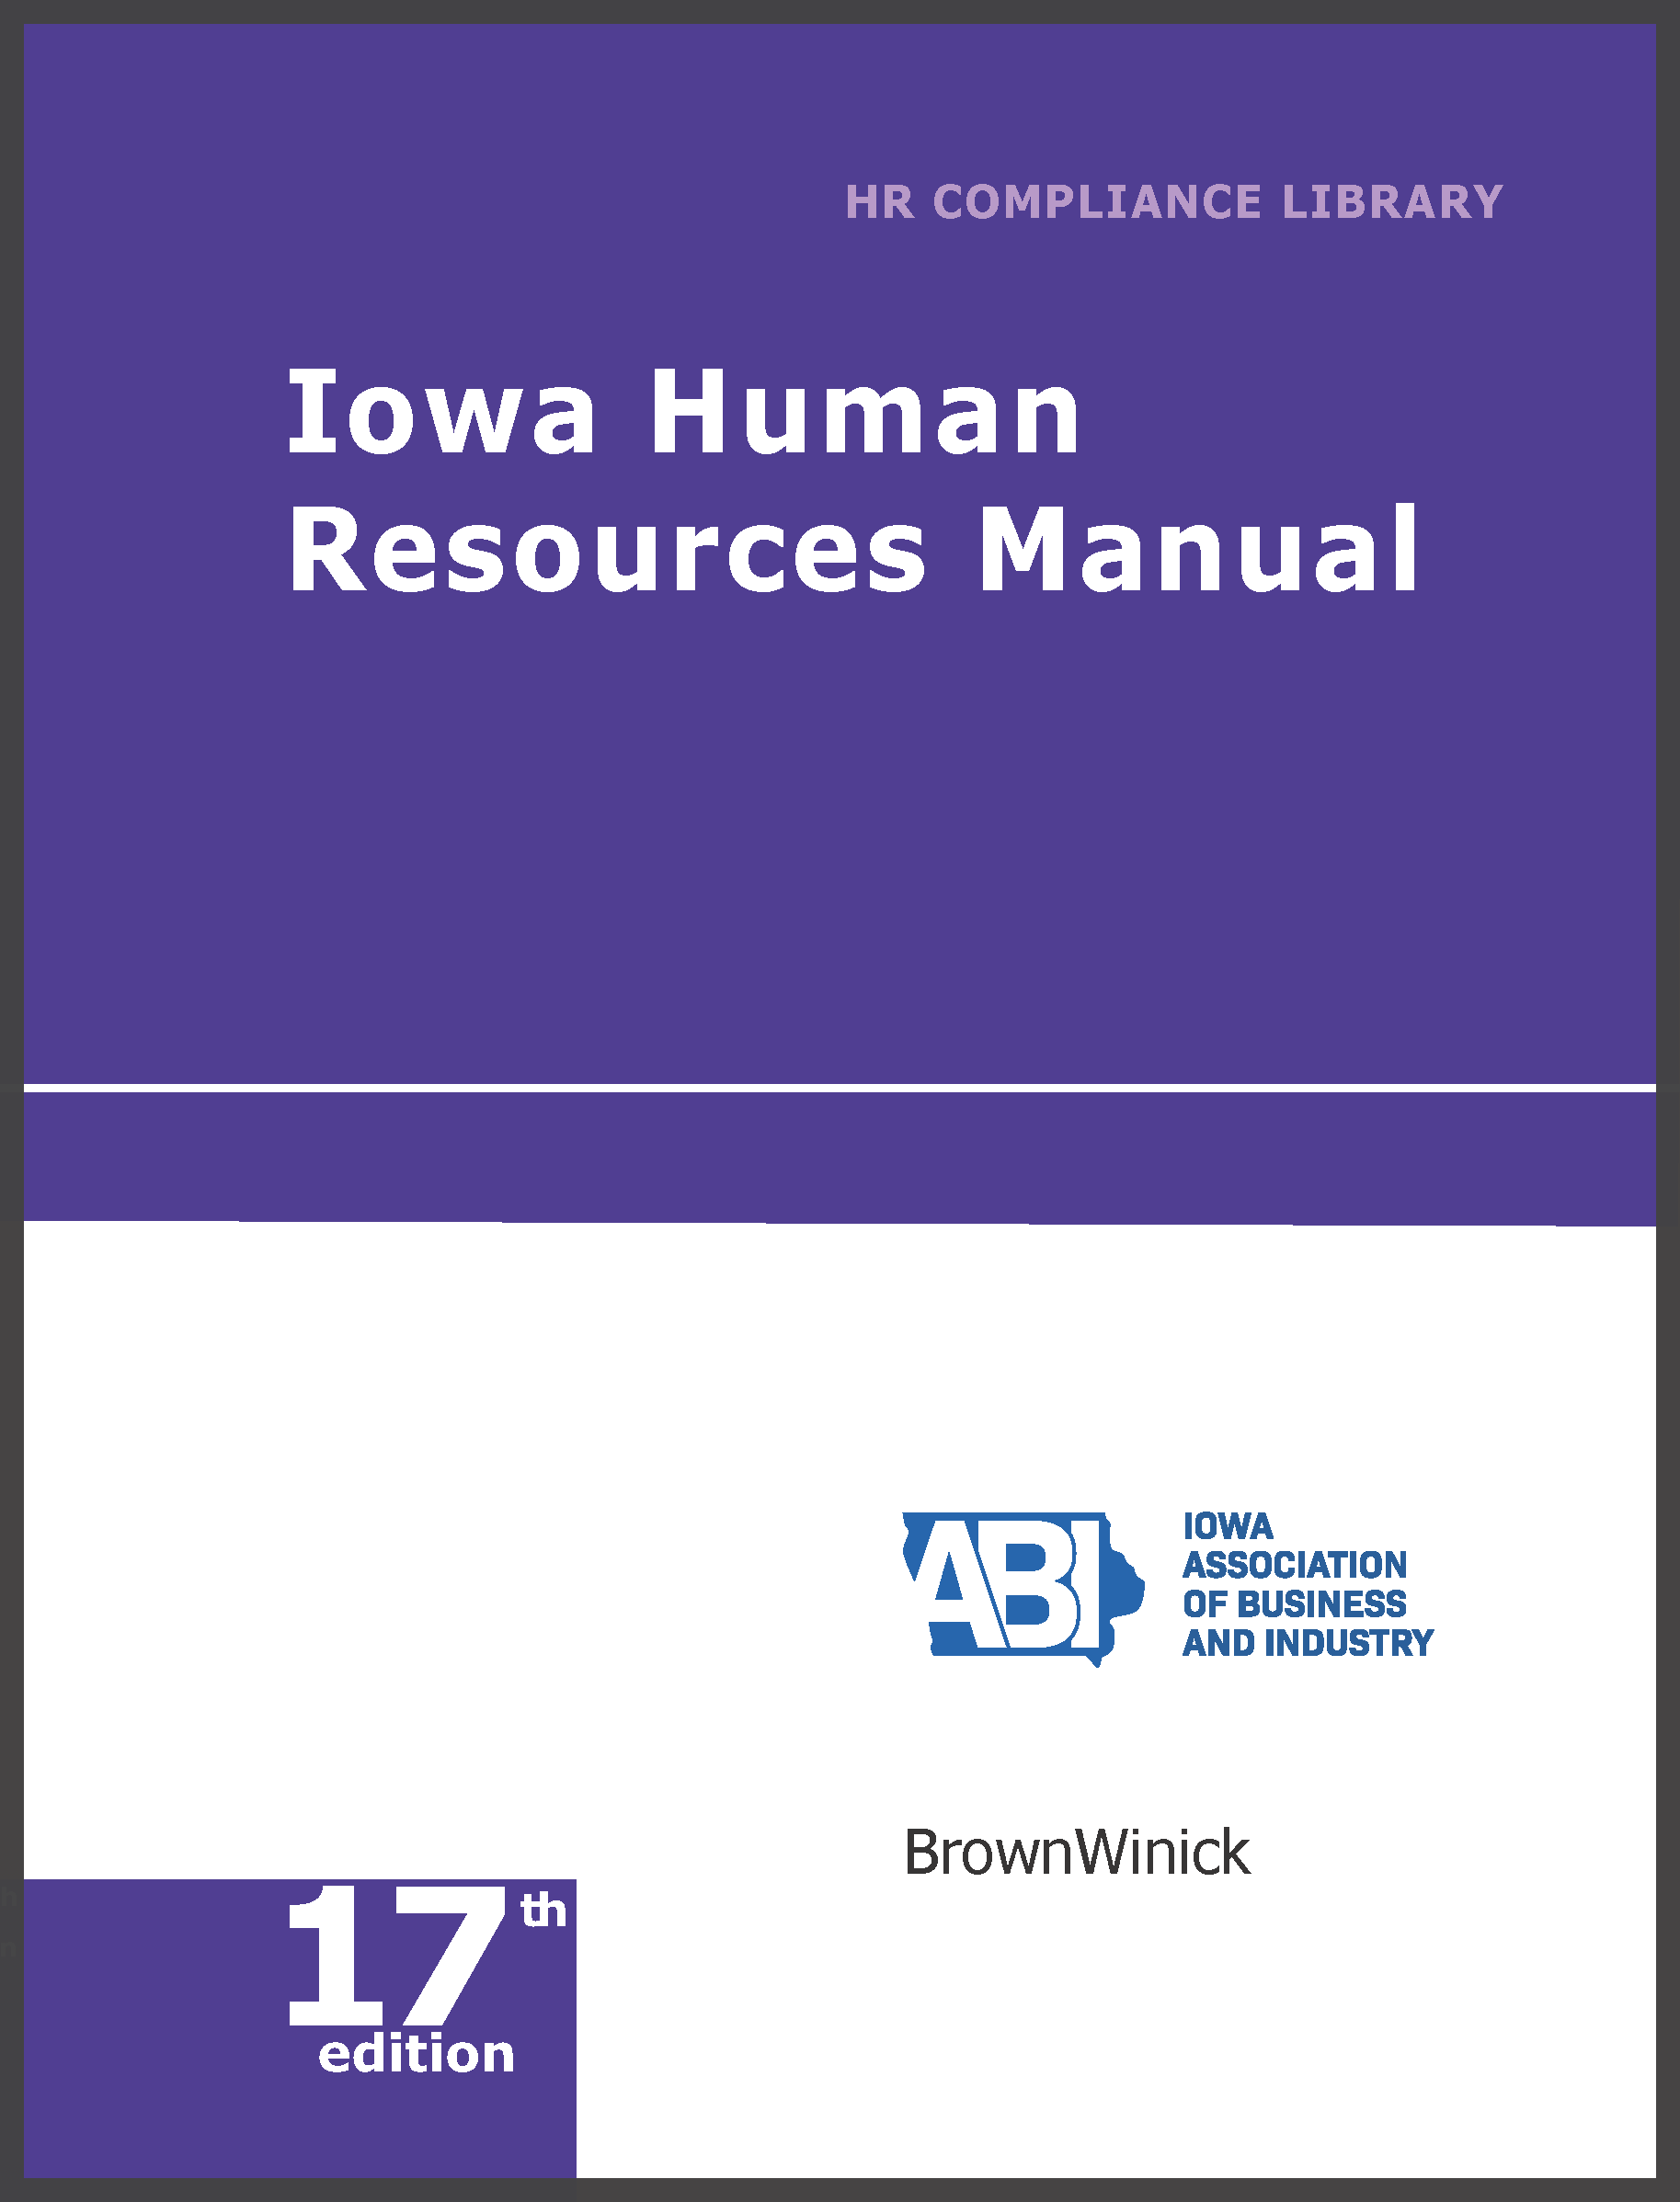 Iowa Human Resources Library employment law image, remote work, labor laws, employment laws, right to work, order of protection, minimum wage